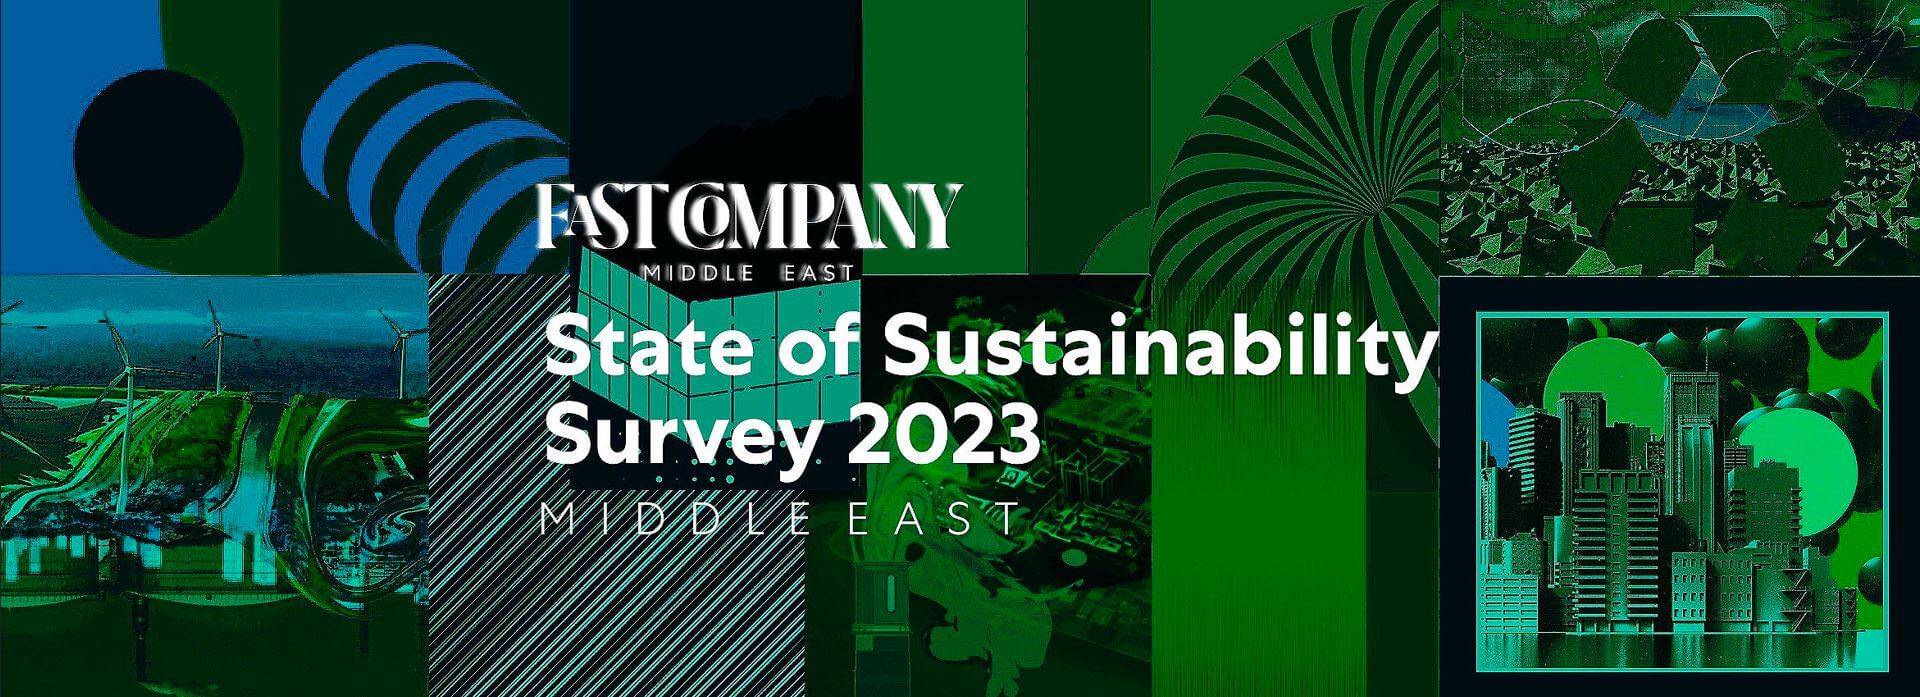 State of Sustainability Survey Middle East 2023